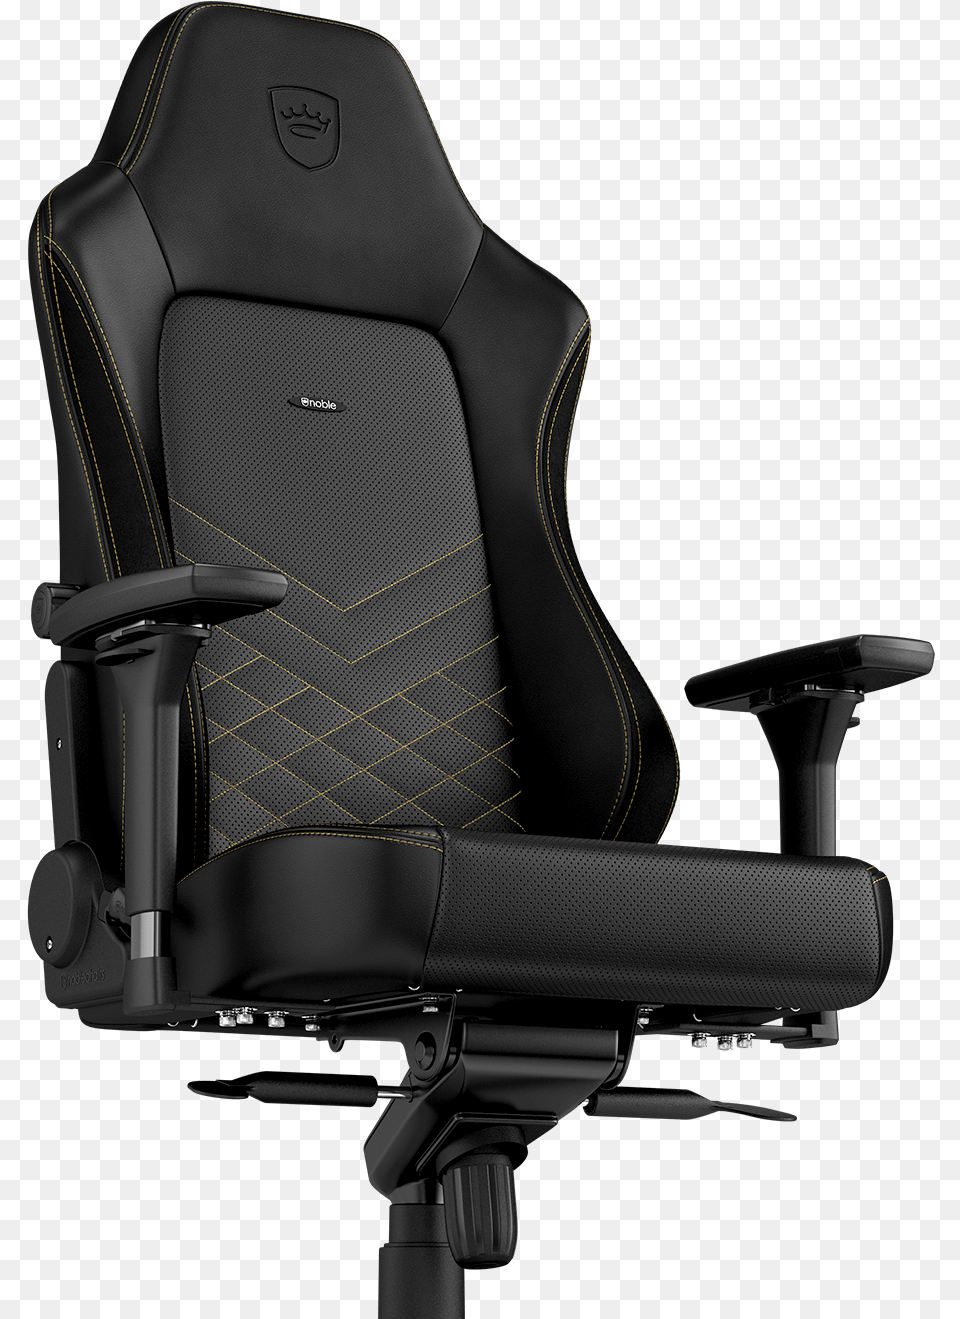 Hero Series Noblechairs Hero Real Leather, Chair, Cushion, Furniture, Home Decor Png